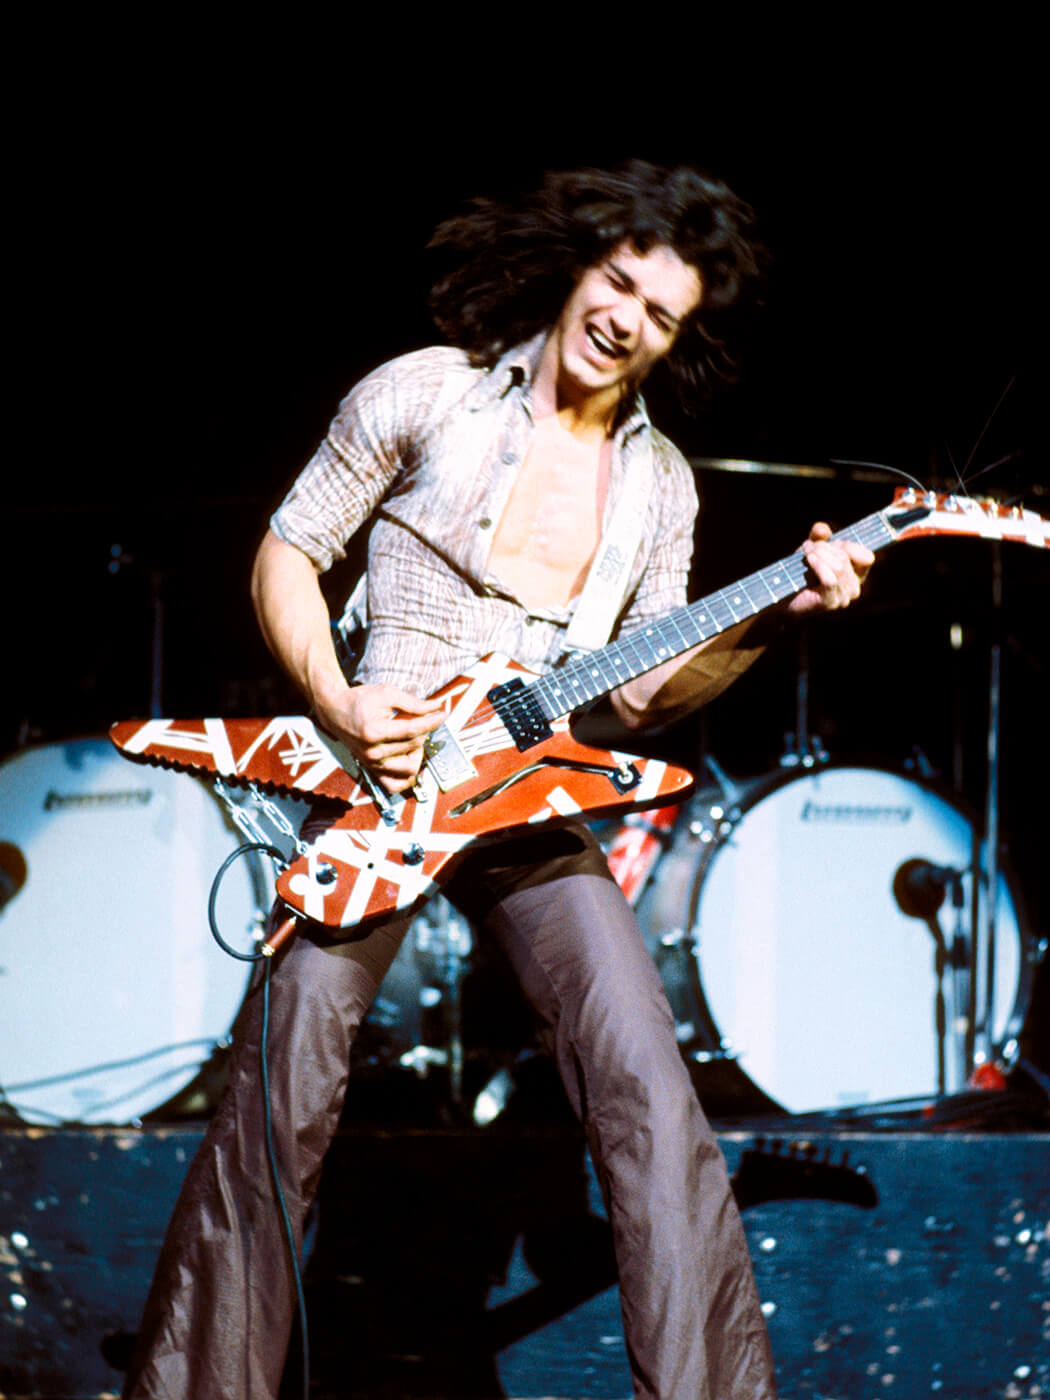 Eddie Van Halen performing onstage in 1978 with his Ibanez Destroyer, photo by Fin Costello/Redferns via Getty Images